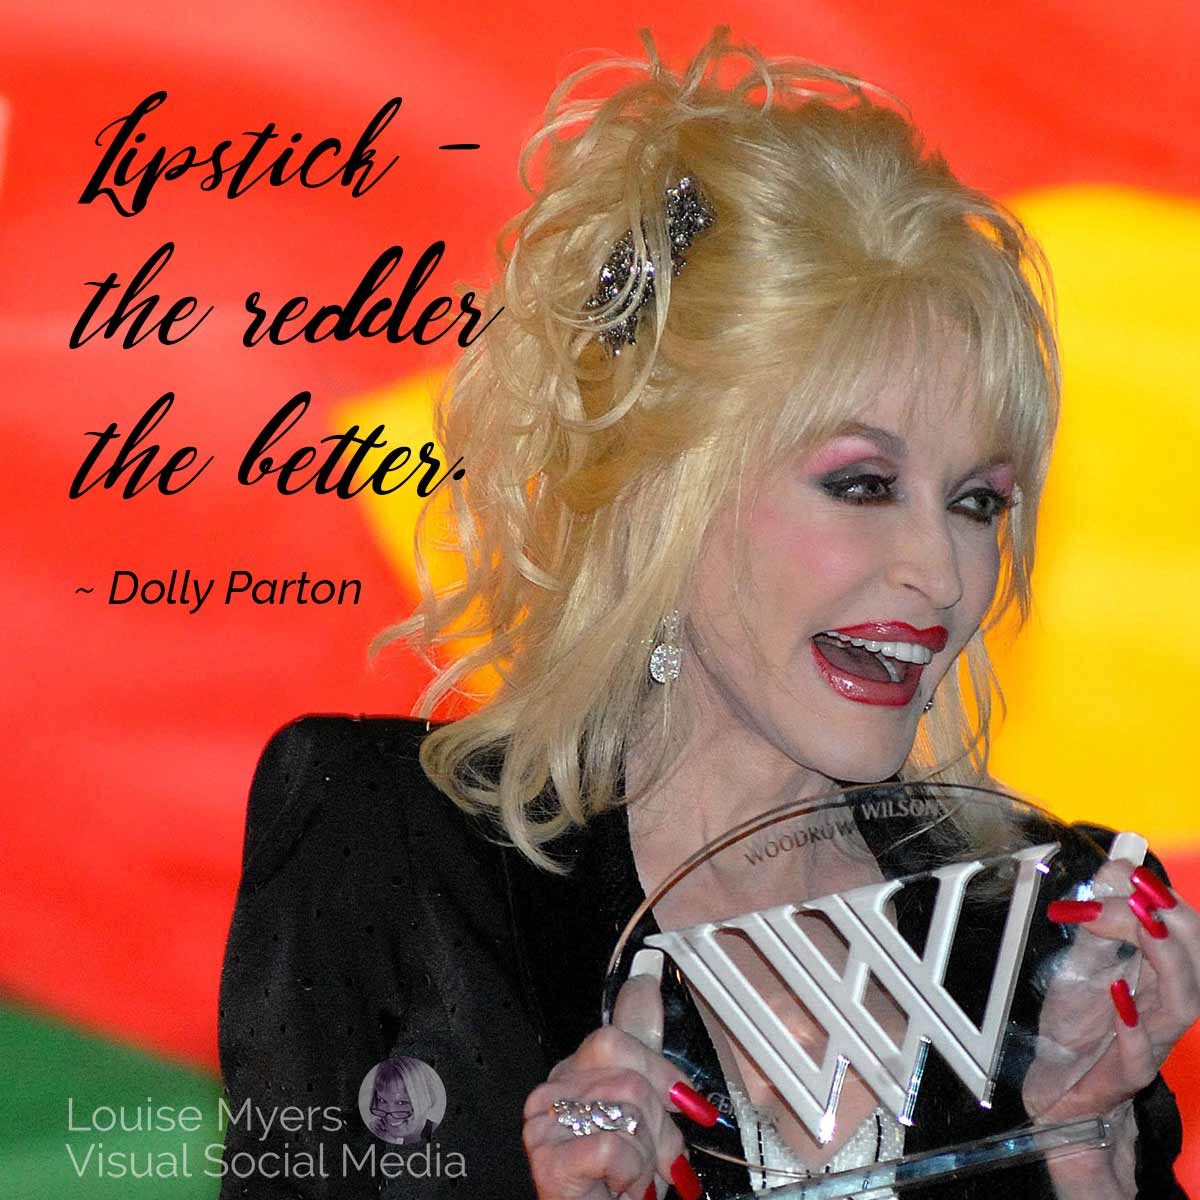 Dolly Parton accepting award has her quote lipstick, the redder the better.